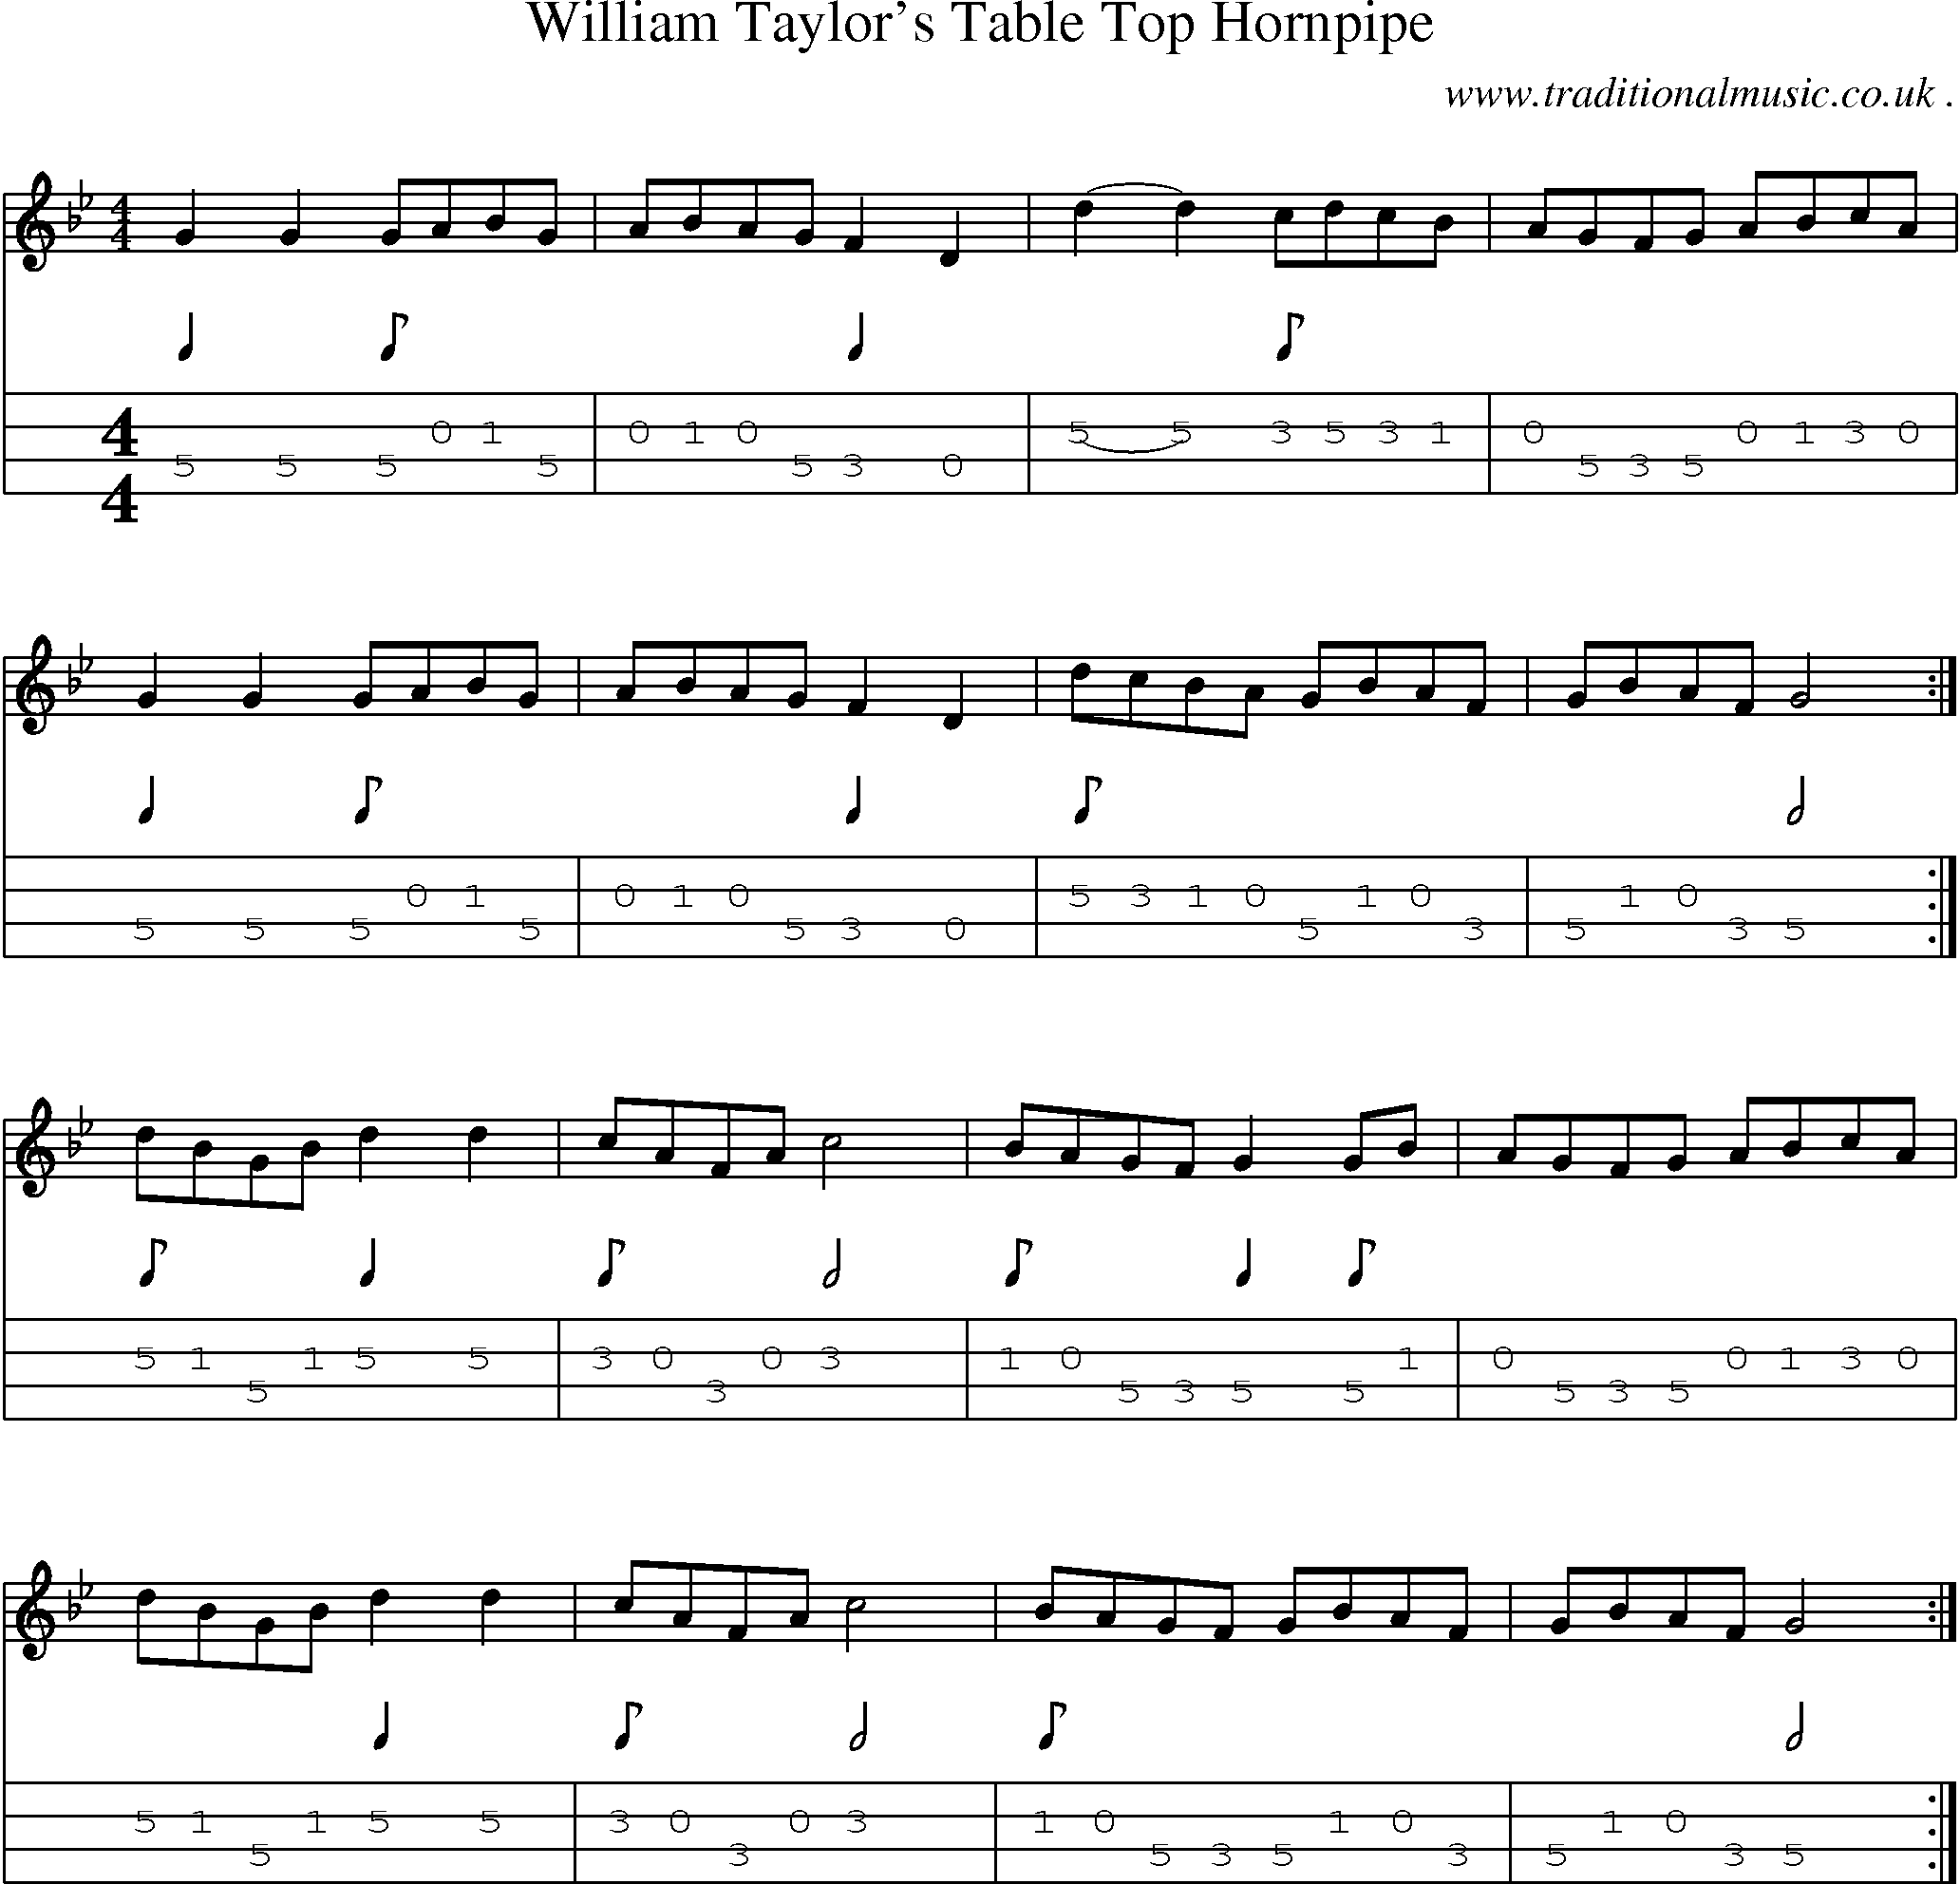 Sheet-Music and Mandolin Tabs for William Taylors Table Top Hornpipe